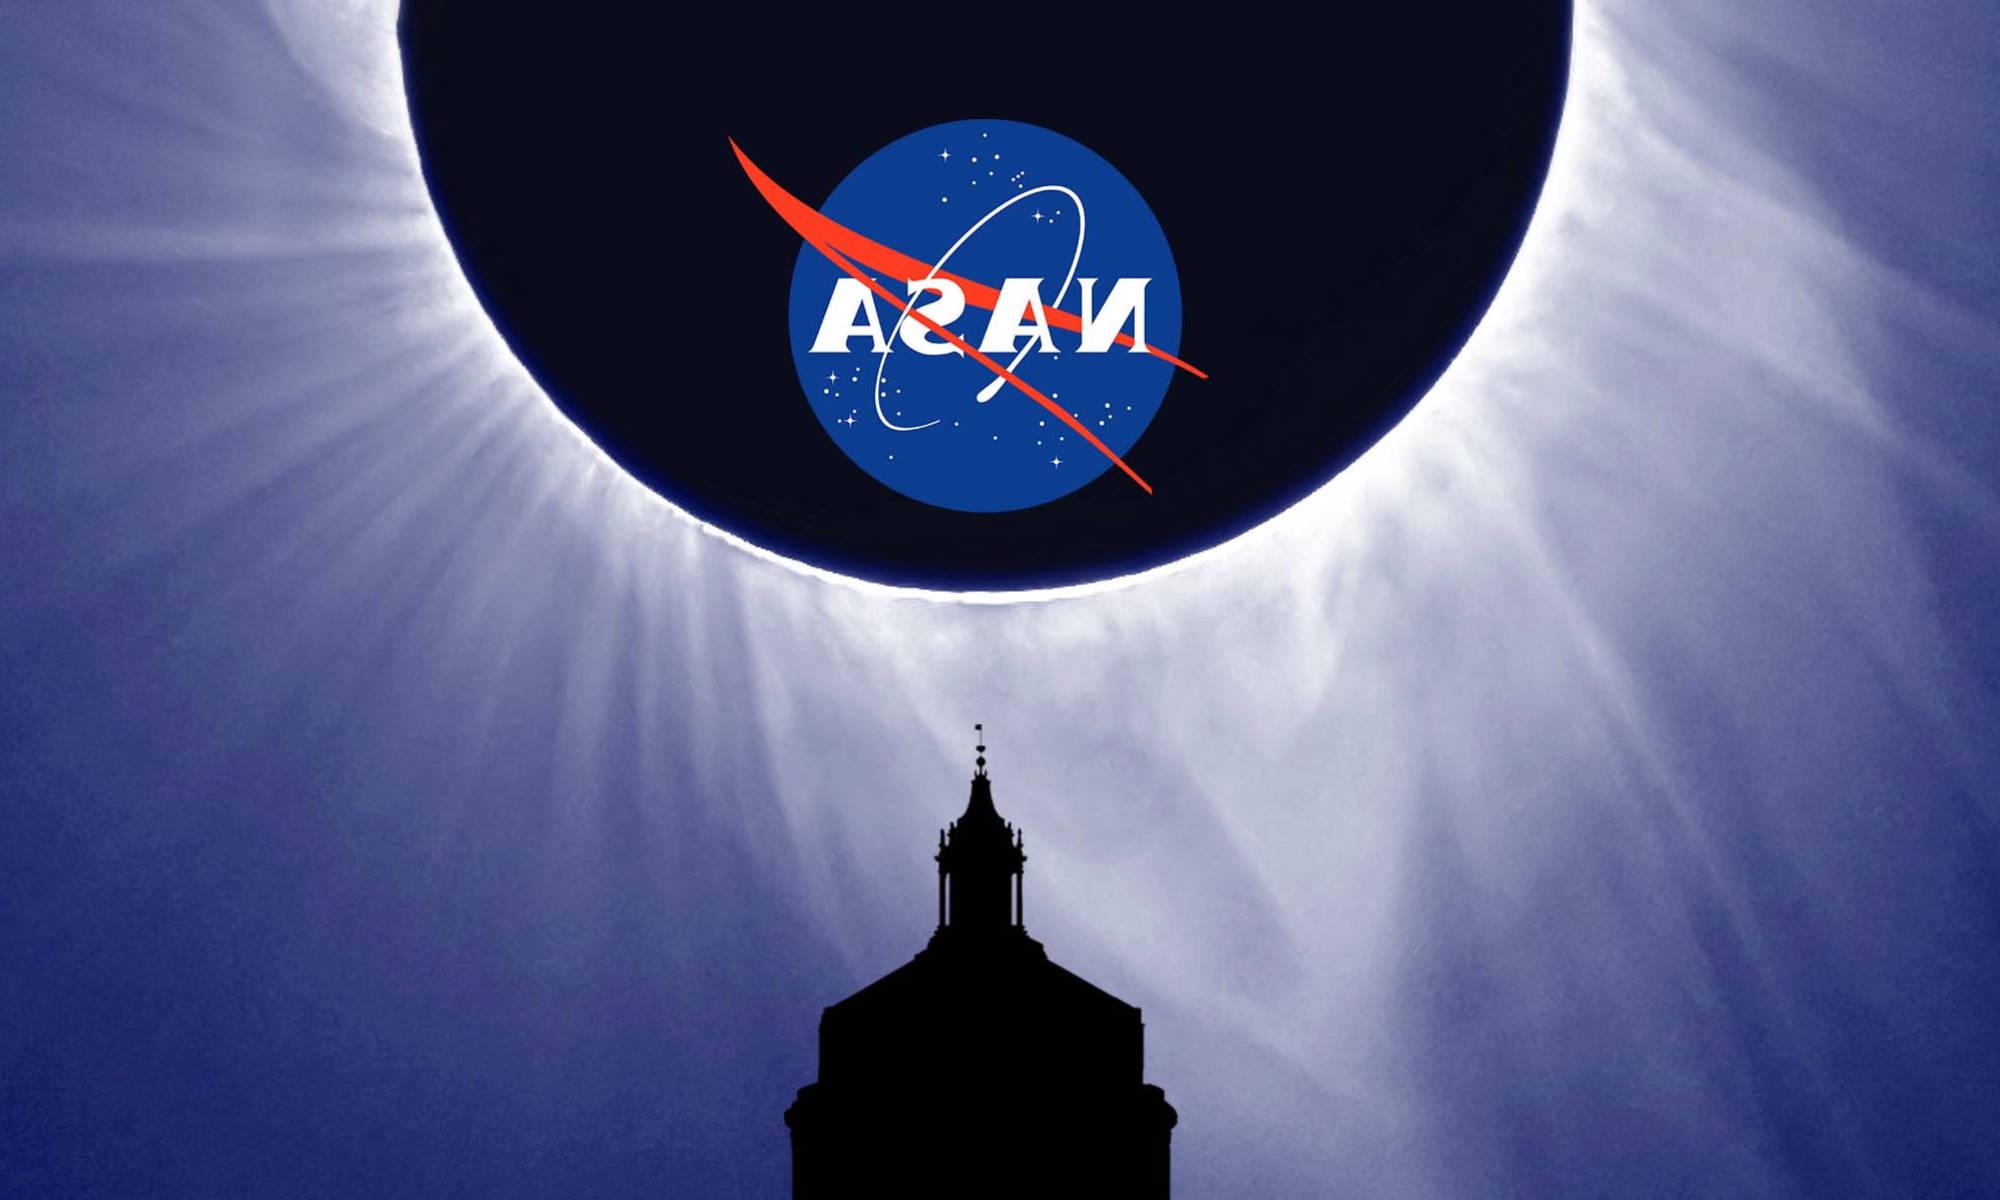 Illustration of the sun during totality with the NASA logo superimposed on it and the outline of the Rush Rhees Library tower below.